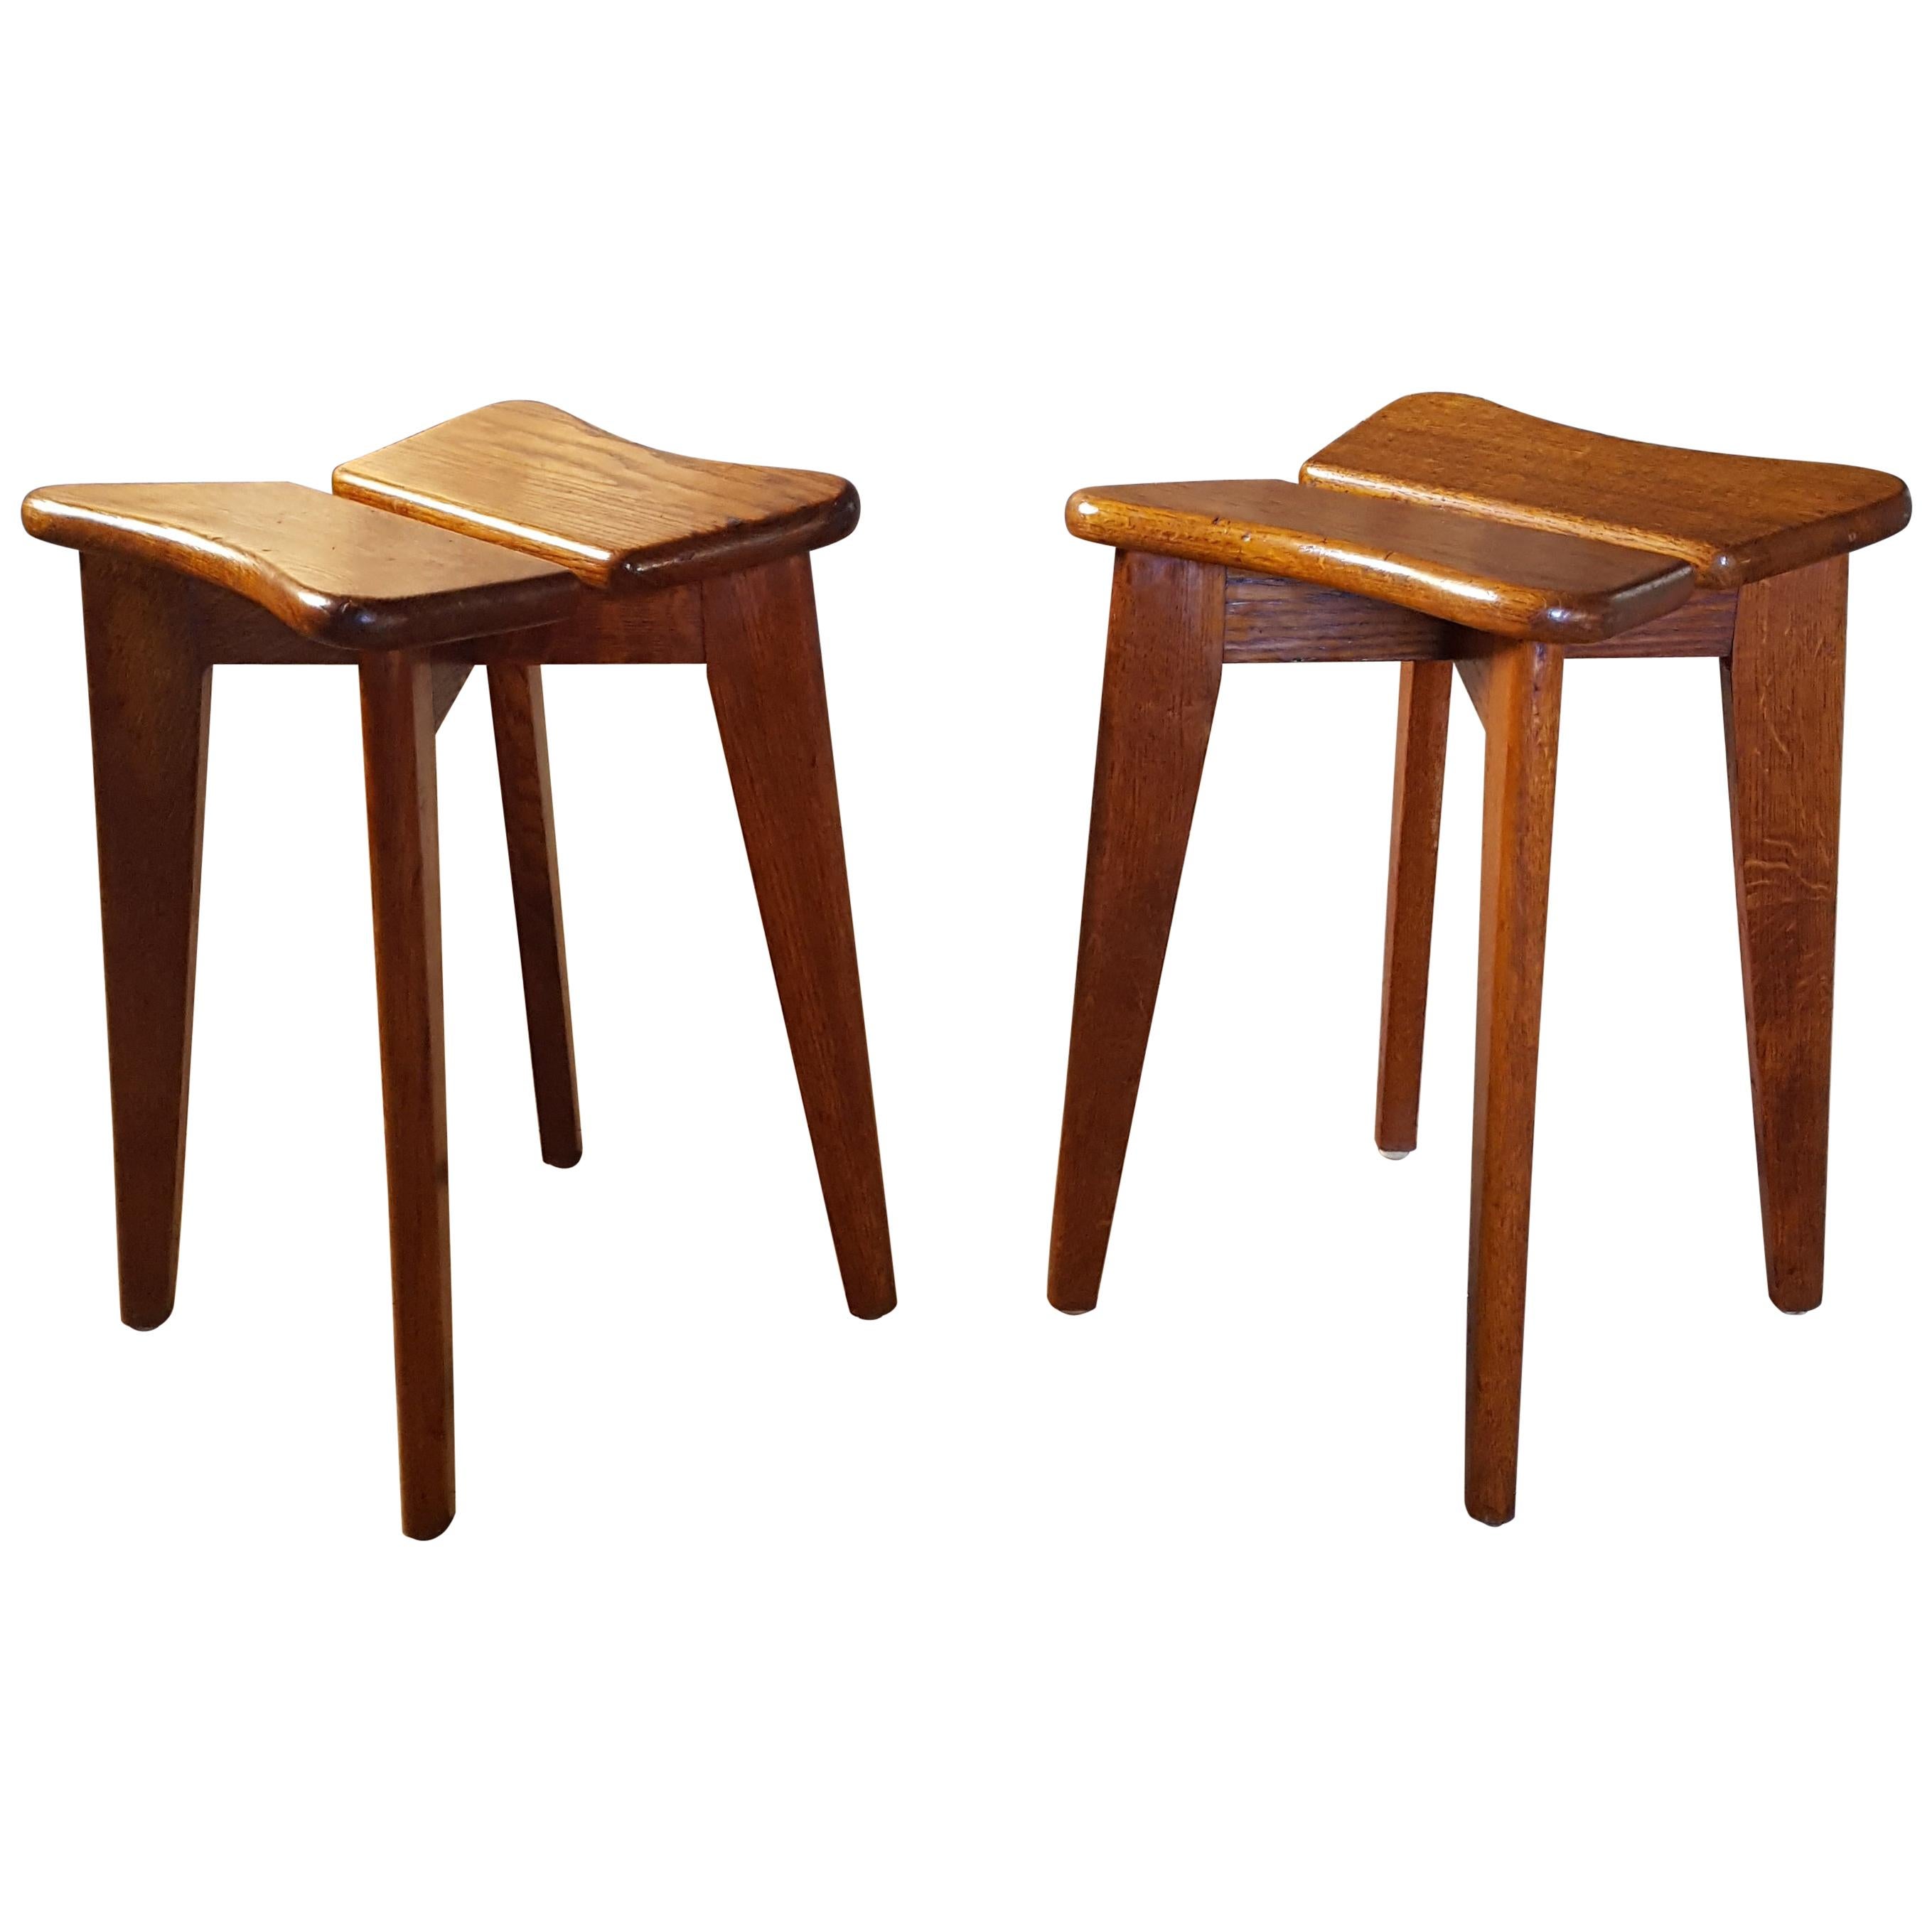 Midcentury Set of Two Oak Wood Stools by Marcel Gascoin, France, 1950